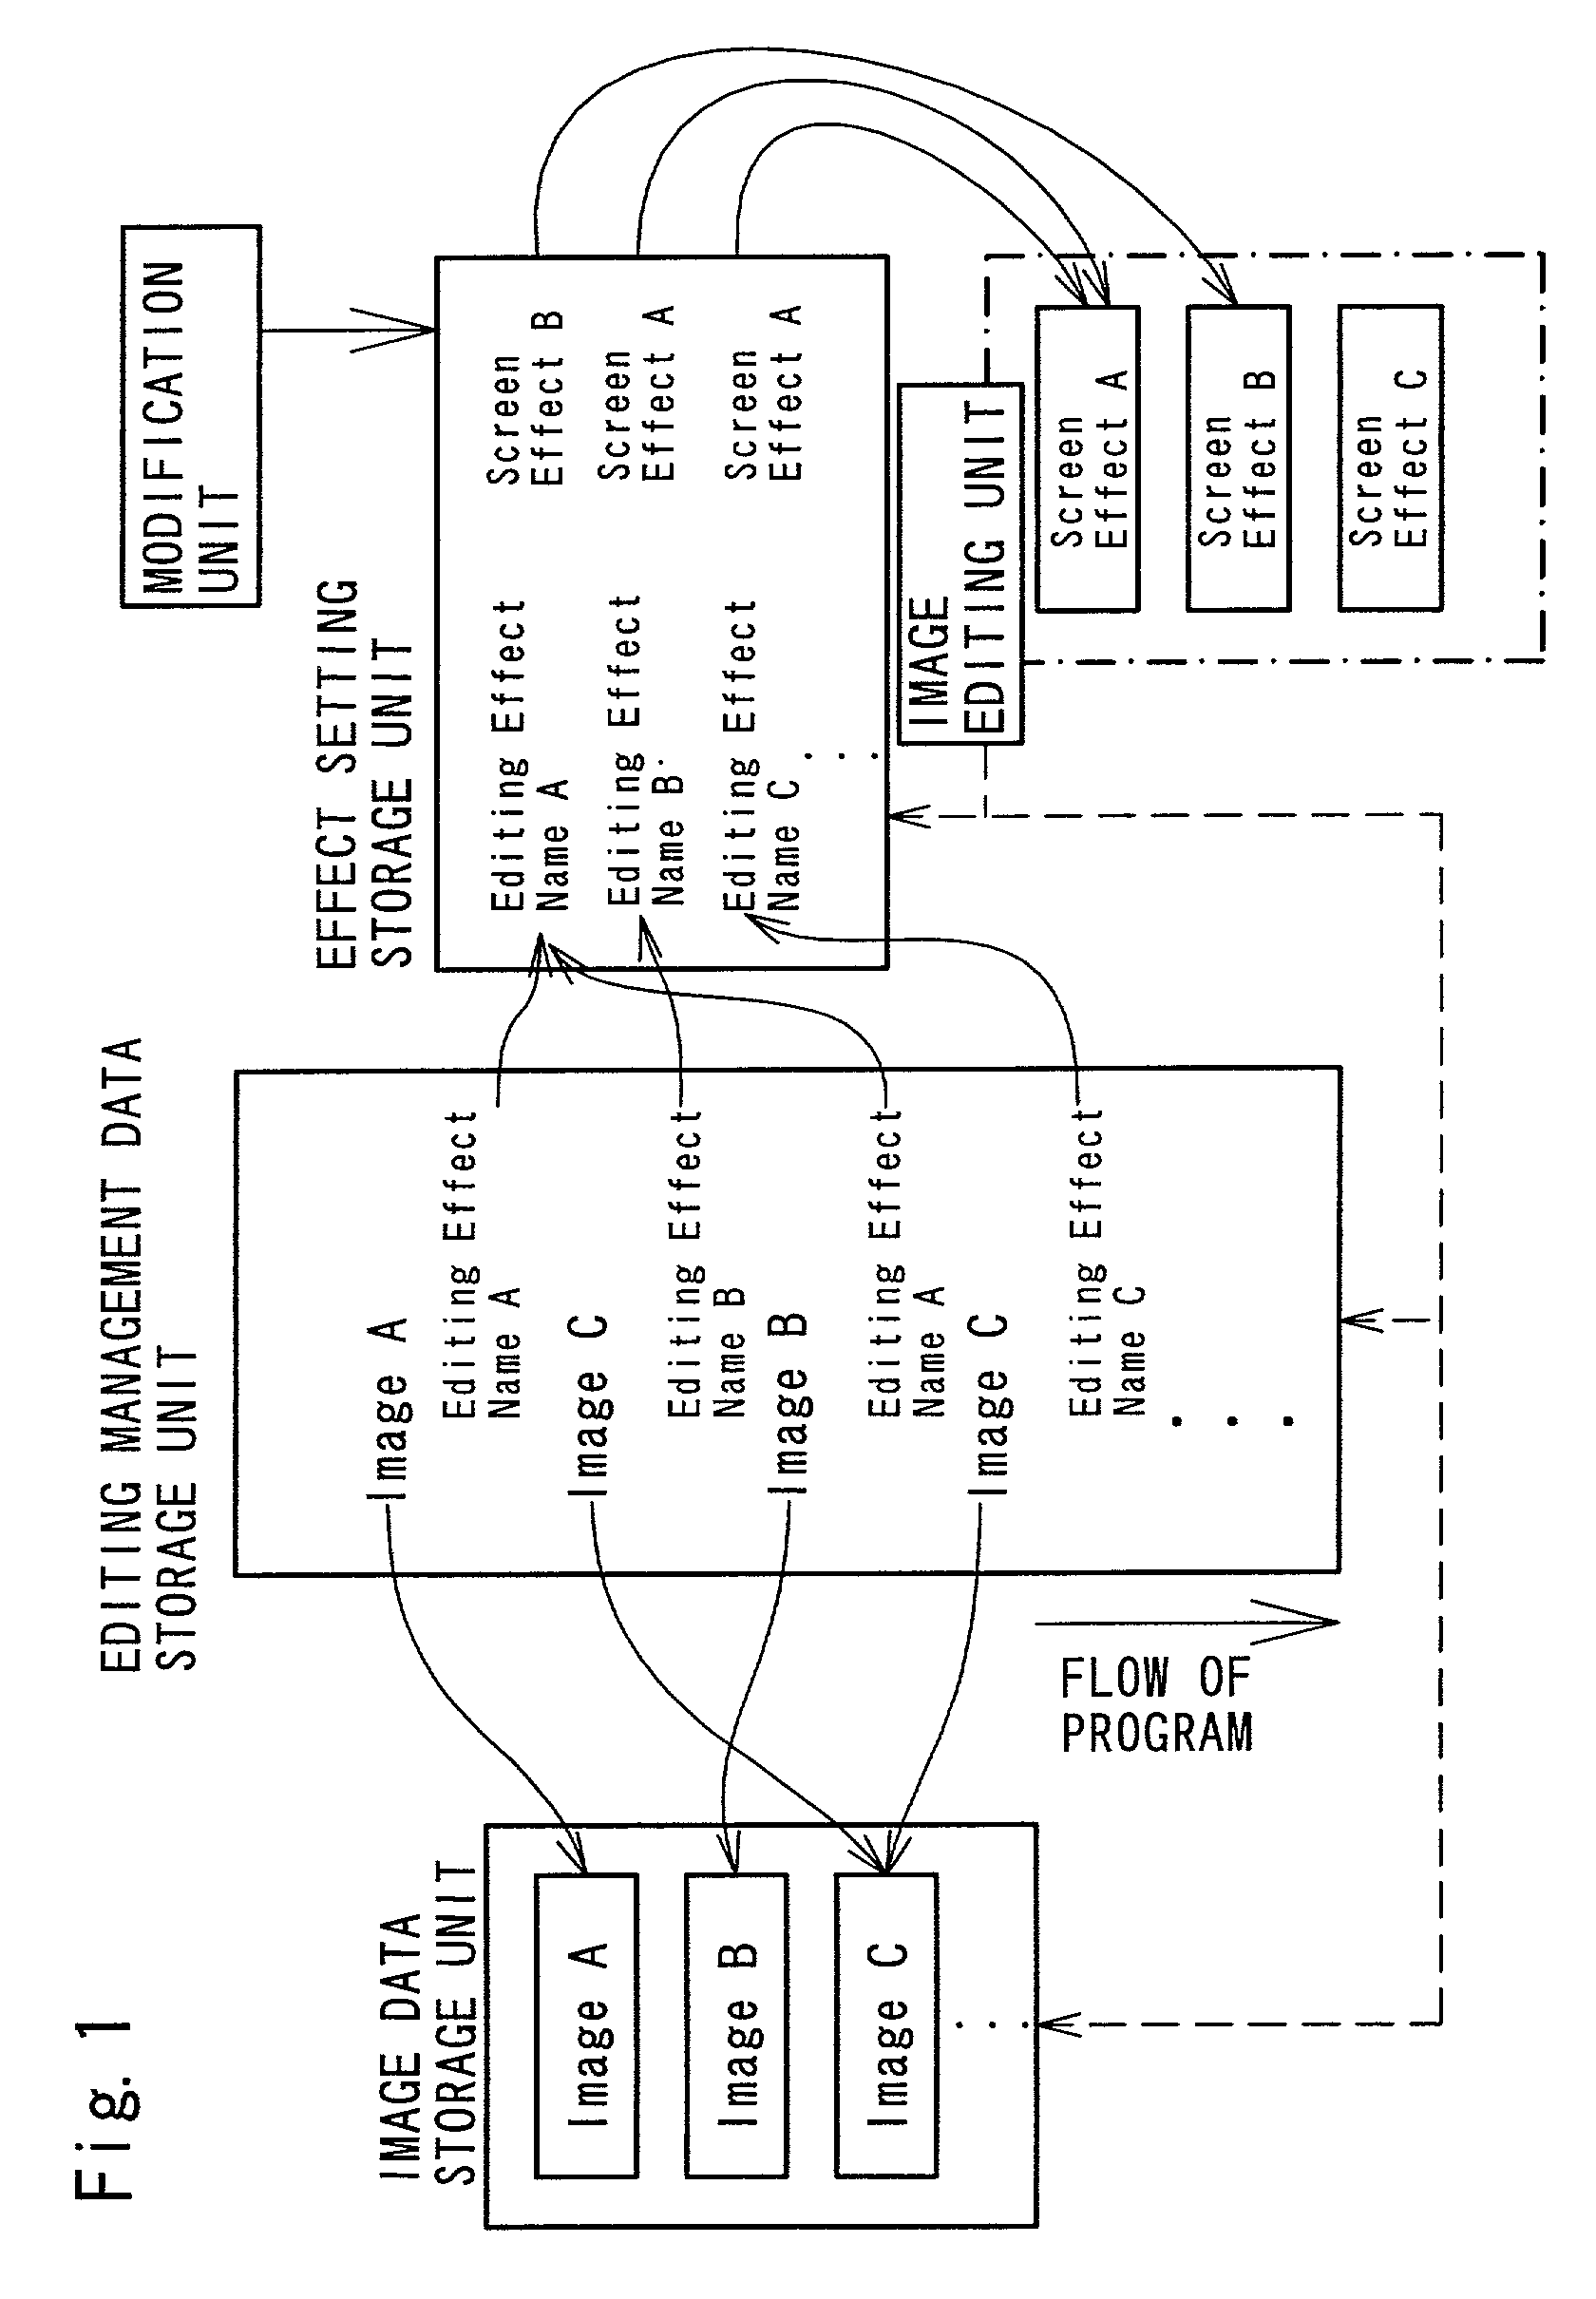 Video editing apparatus and editing method for combining a plurality of image data to generate a series of edited motion video image data